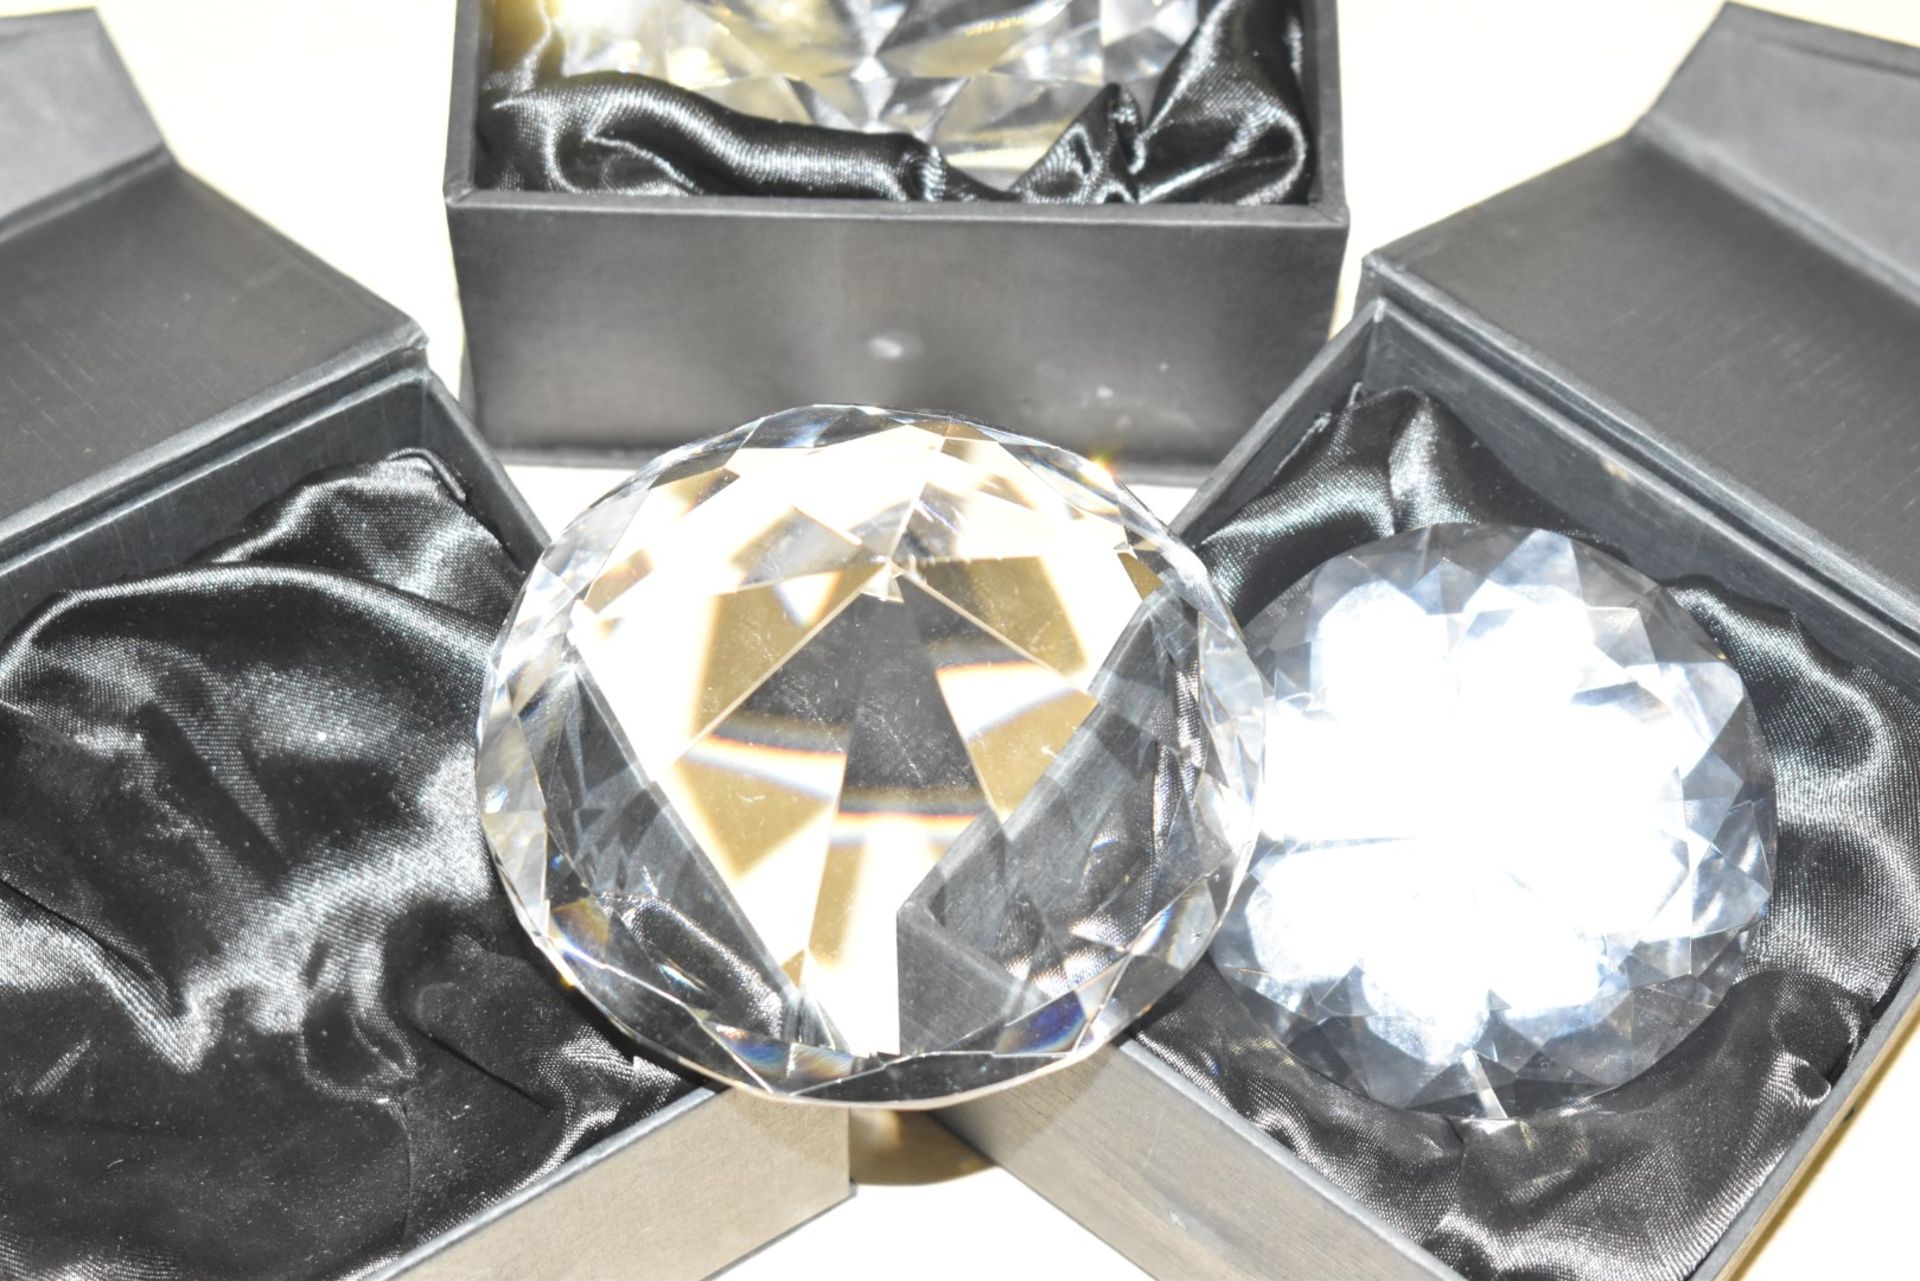 3 x Ice London Faux Diamond Paperweights - New and Boxed - Ref: In2128 wh1 pal1 - CL011 - - Image 2 of 8